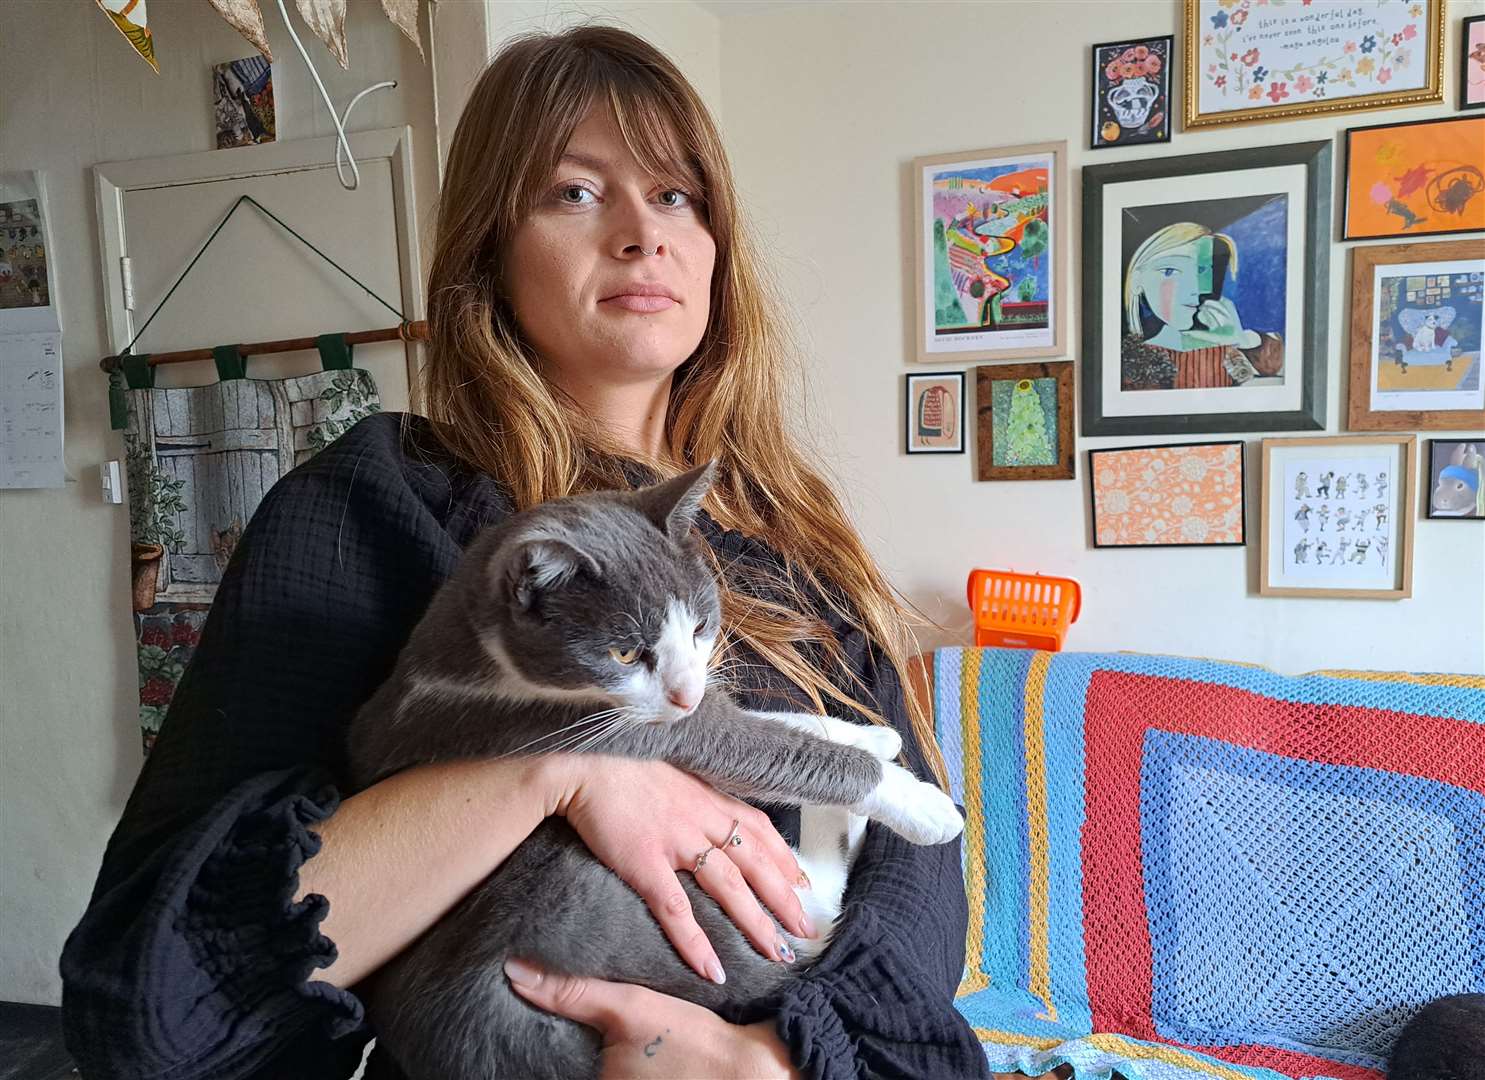 Rachel Craft with her famous cat Griffin, who has been missing for a week